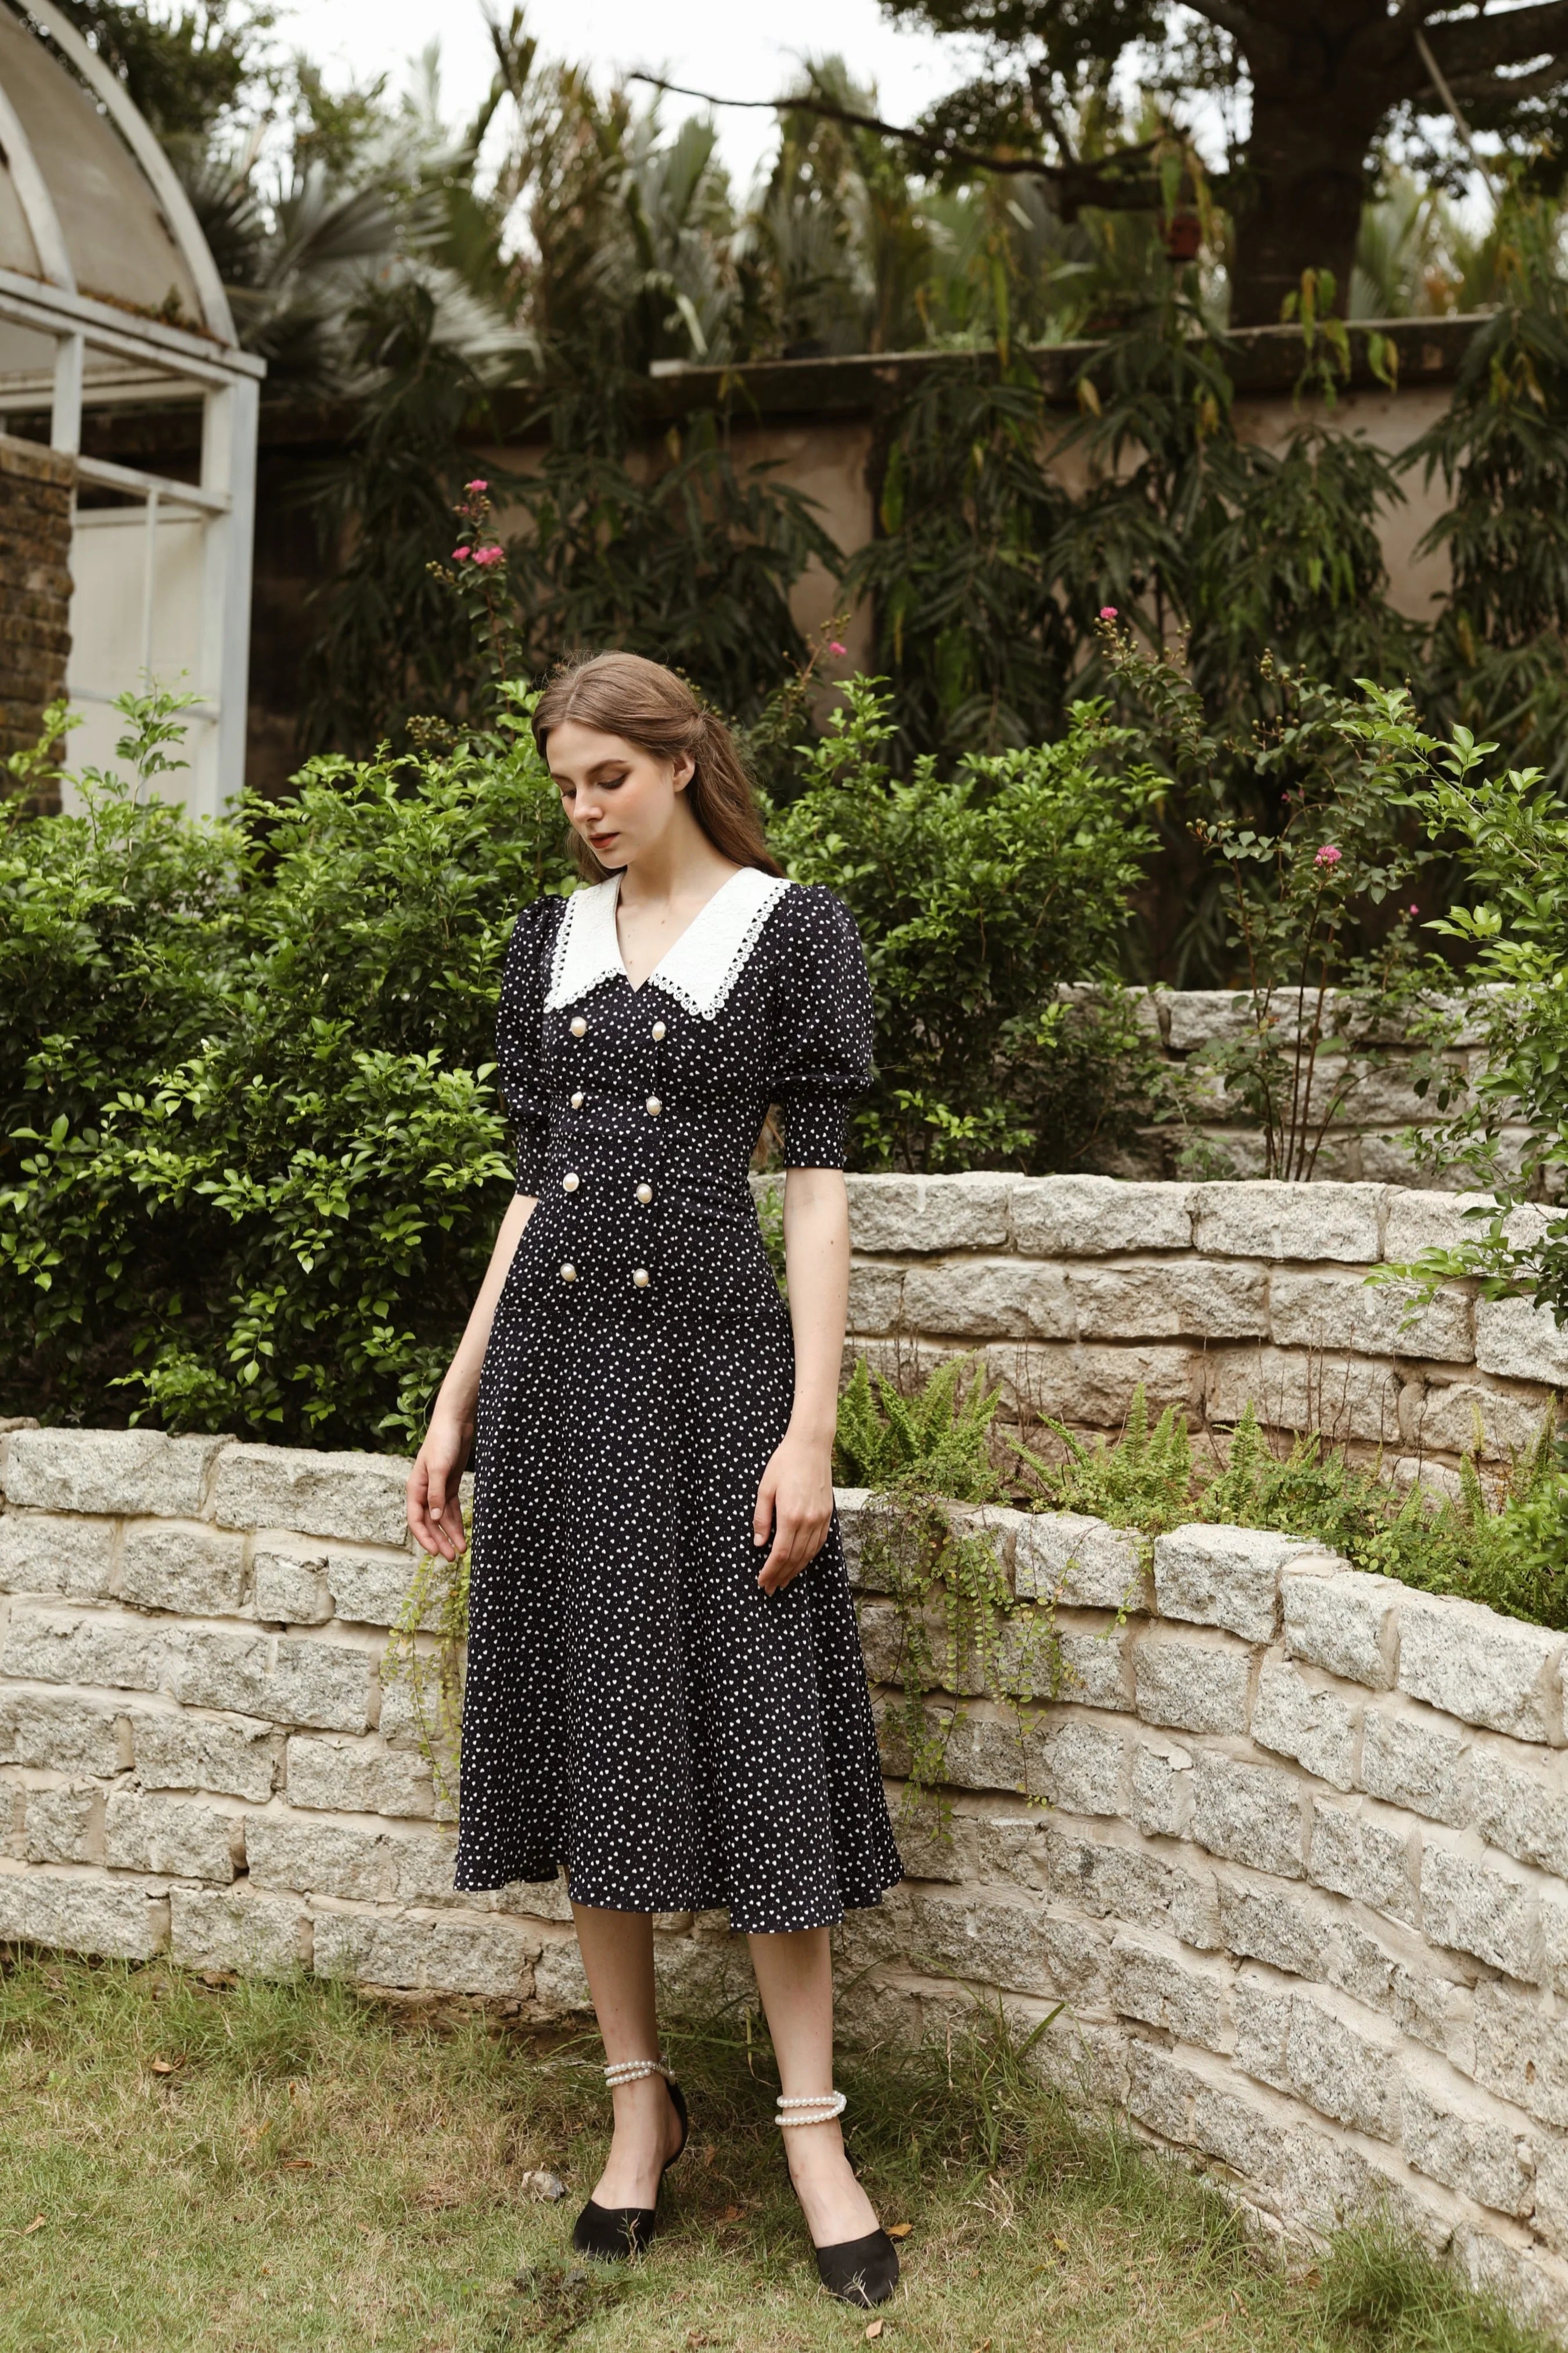 Explore the Tranquil Elegance of RESORT24's "Serene Haven" Collection